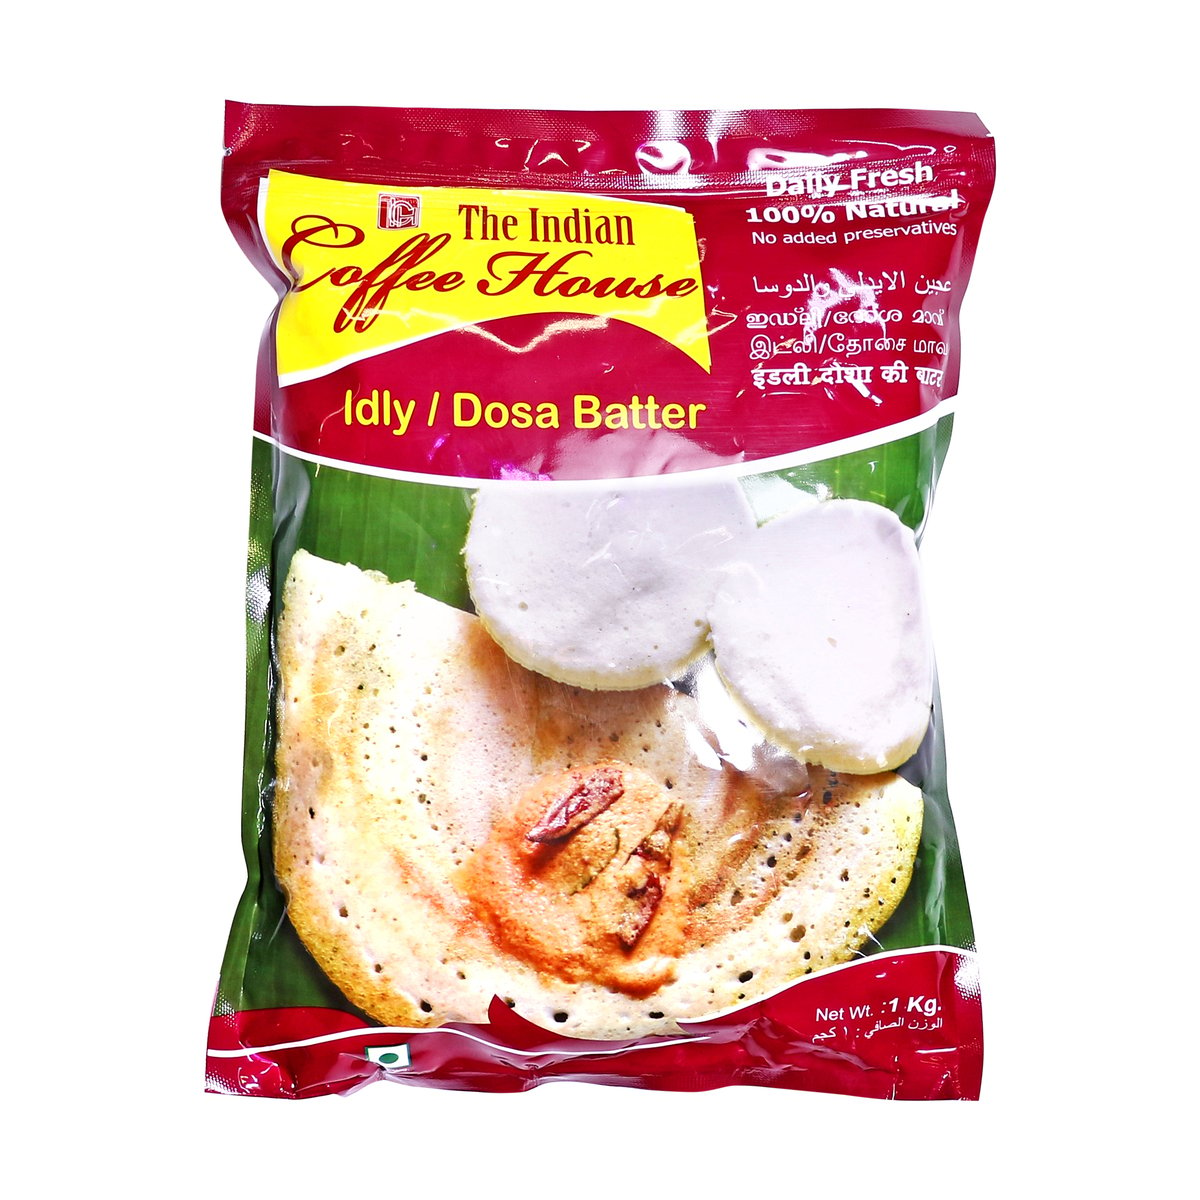 The Indian Coffee House Idly/Dosa Batter 1kg